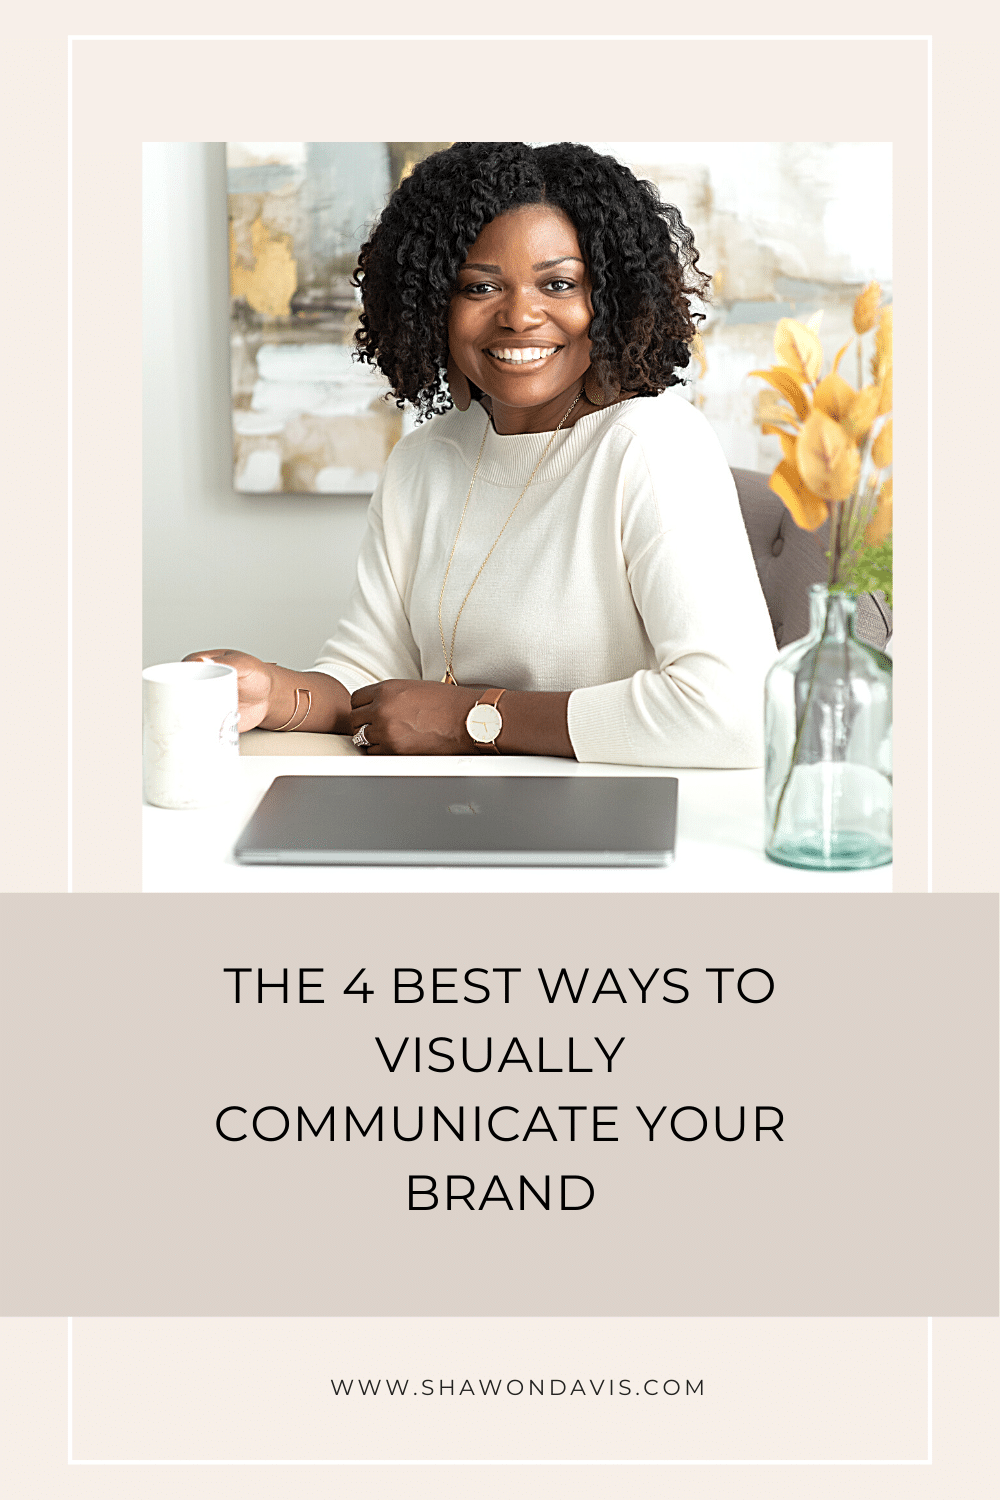 The 4 Best Ways to Visually Communicate Your Brand